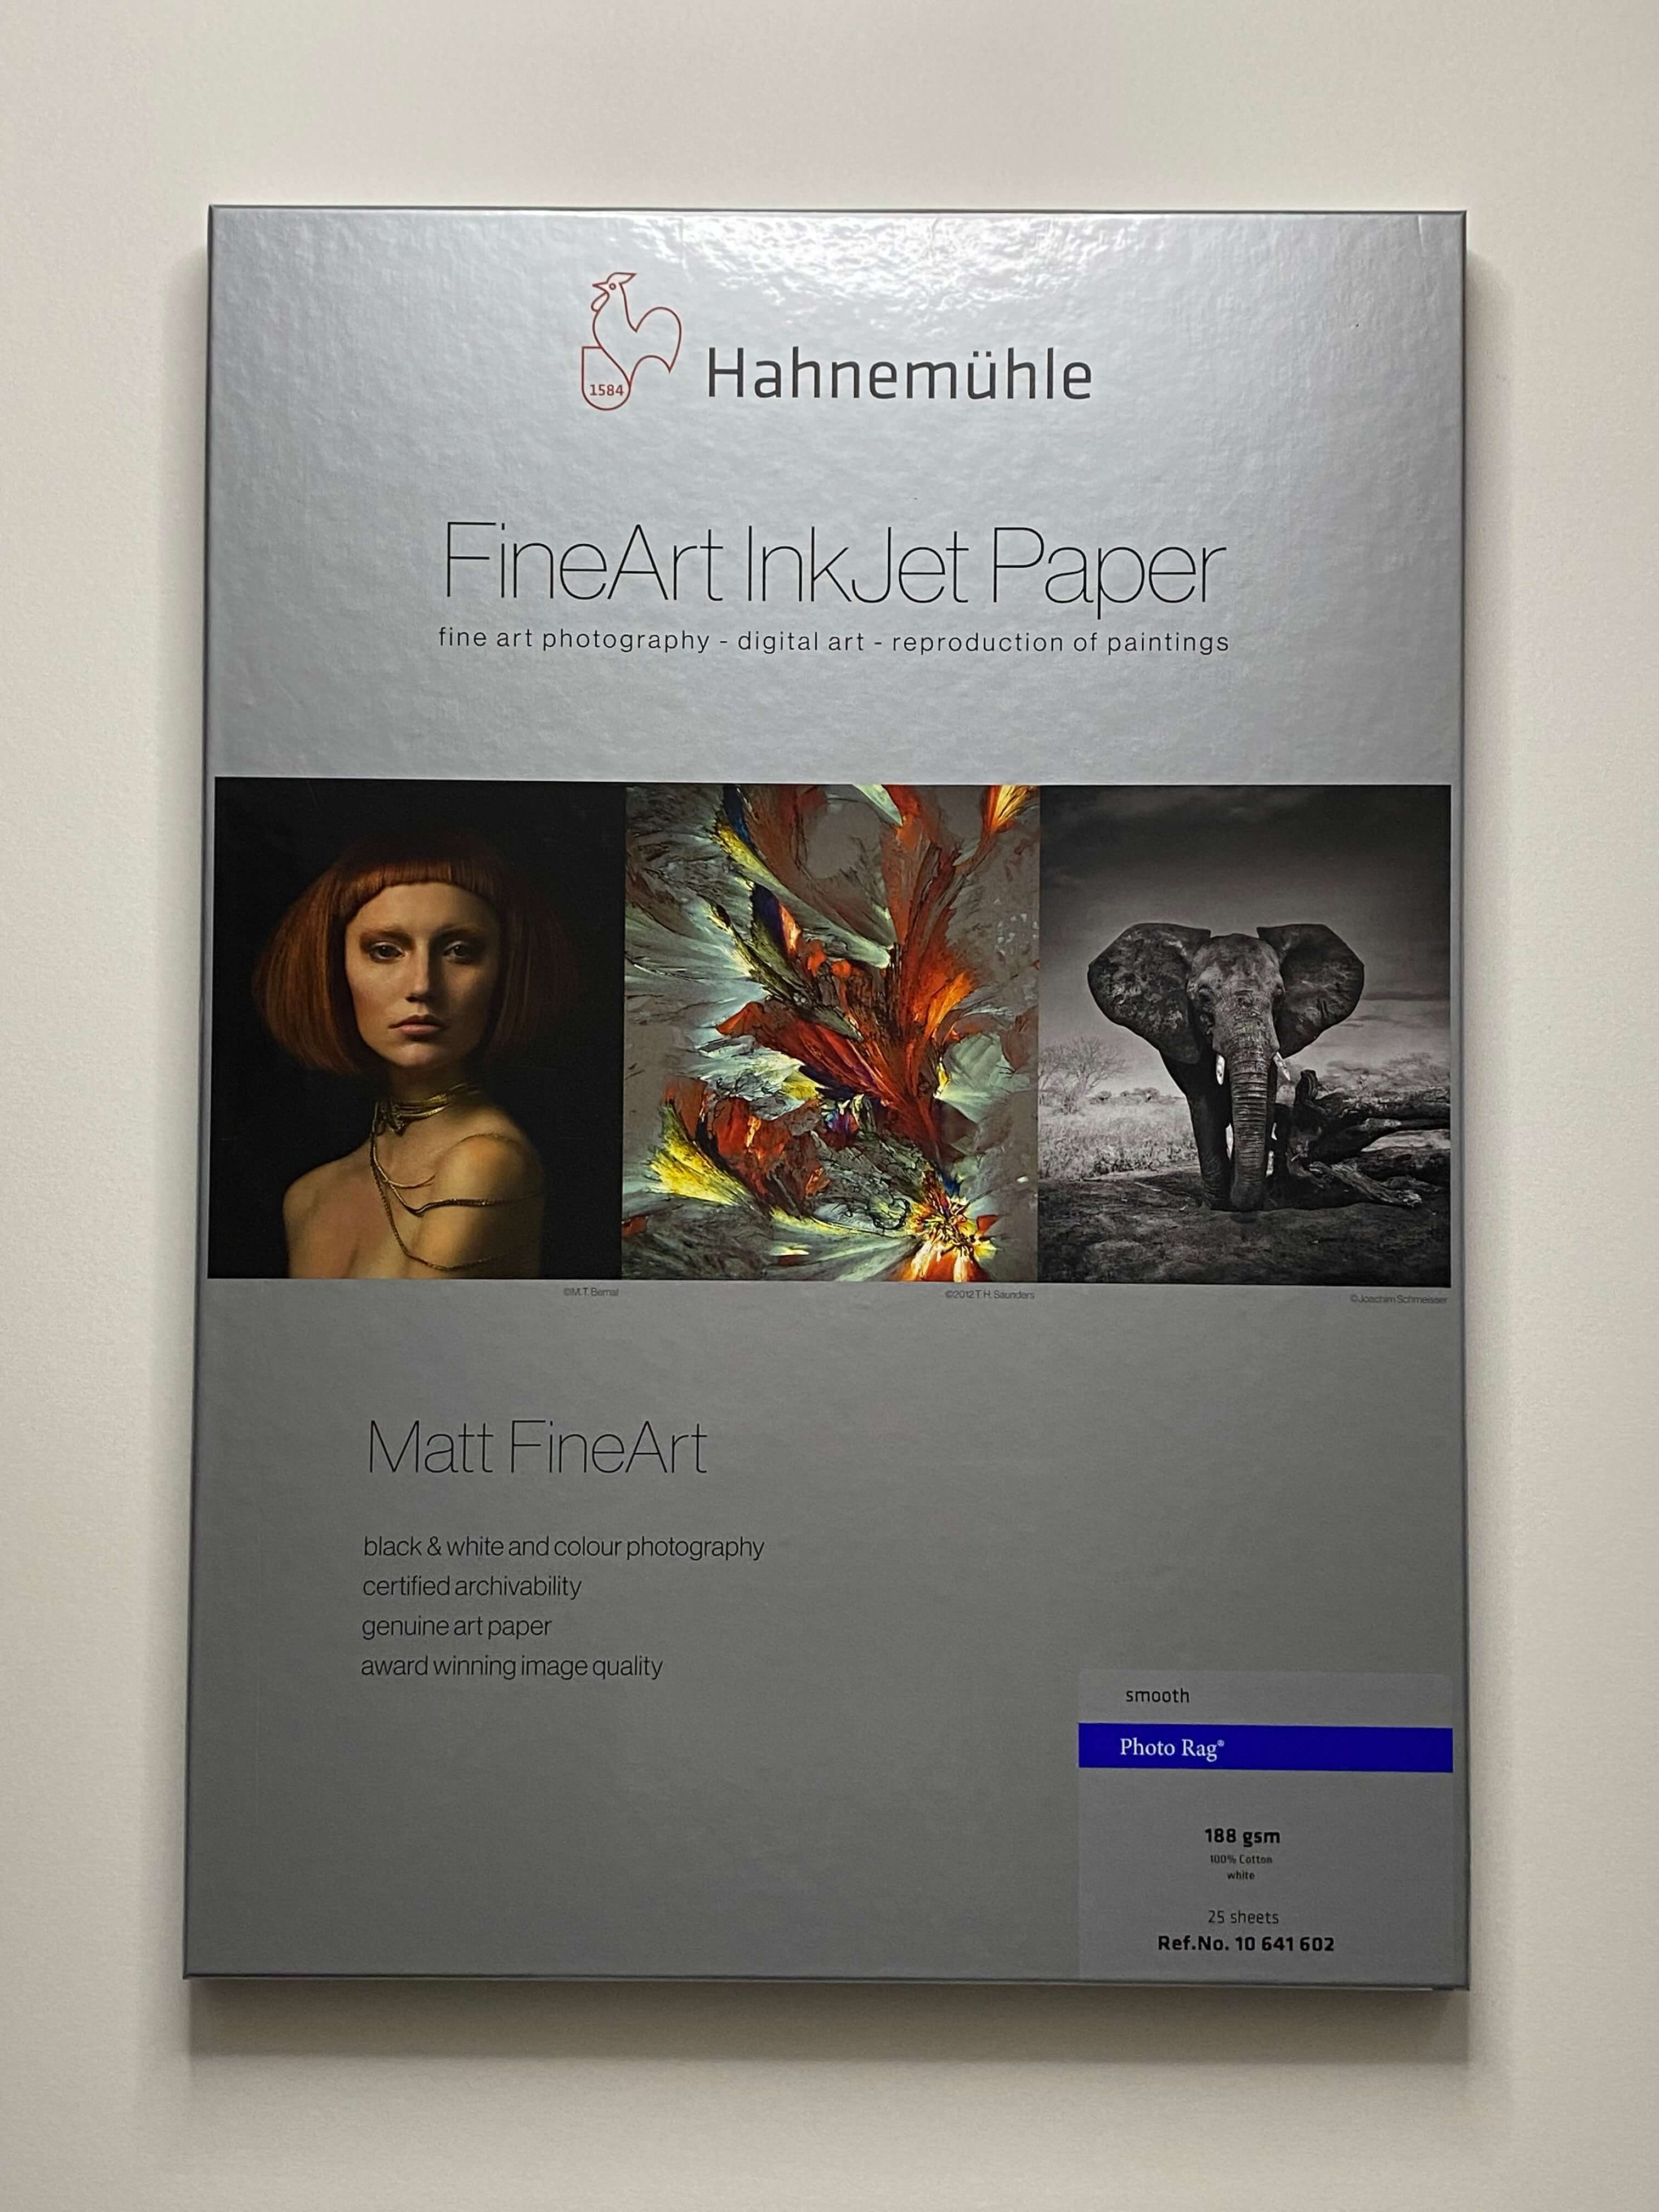 Hahnemuhle Photo Paper 188g 25 sheets